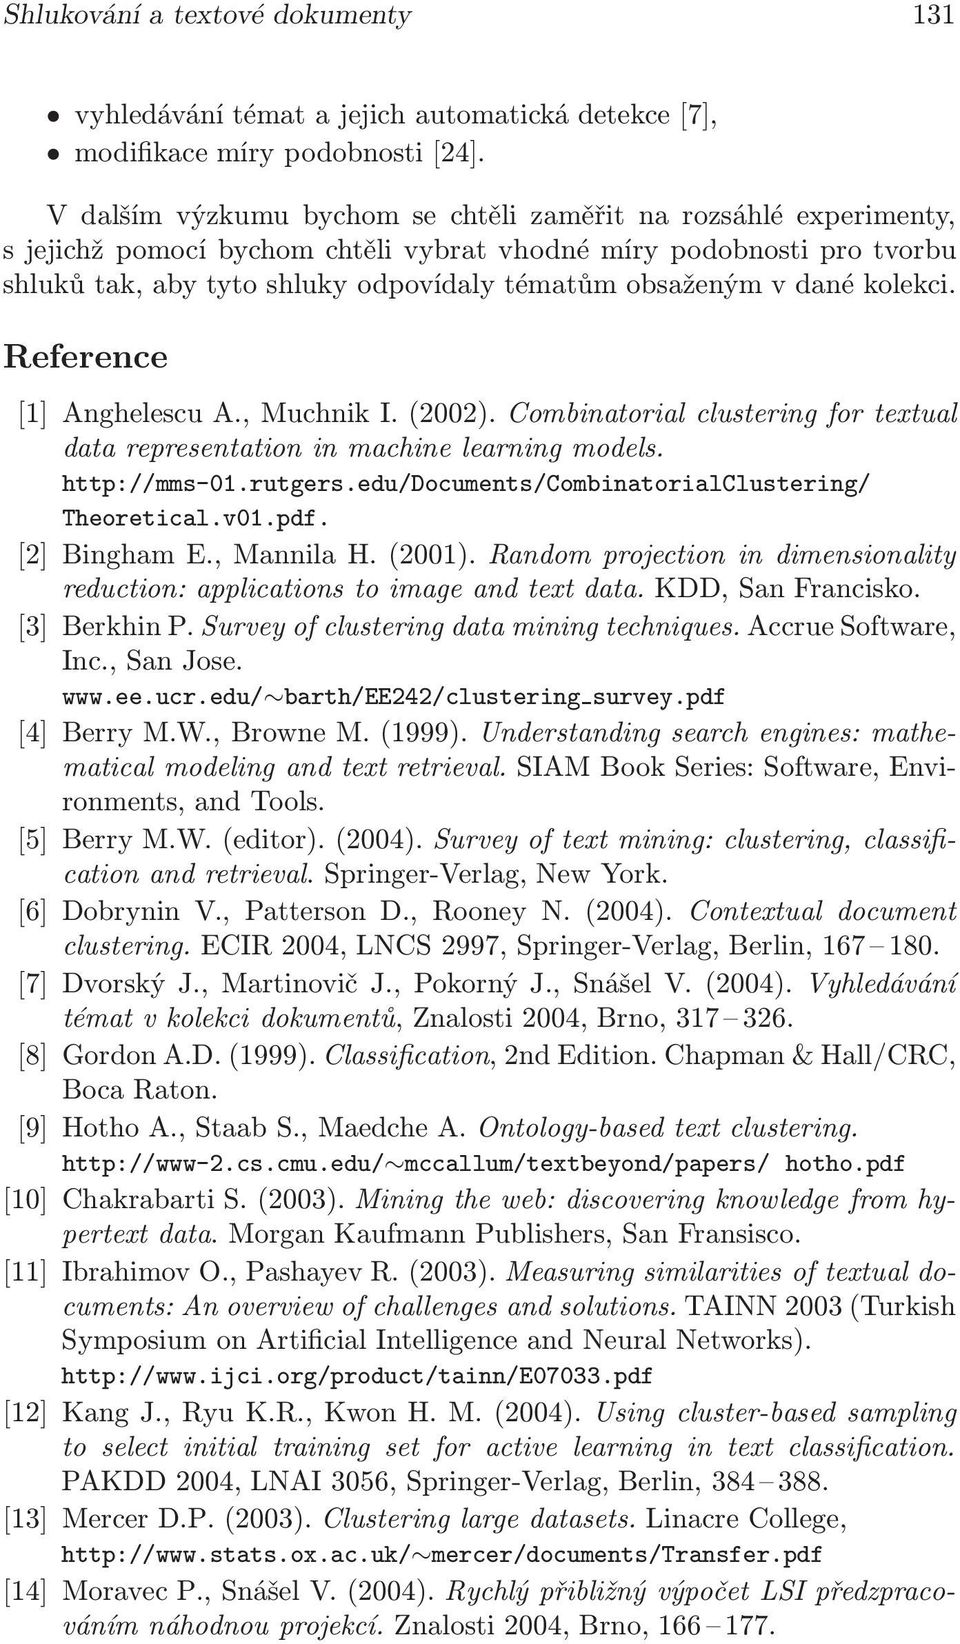 dané kolekci. Reference [1] Anghelescu A., Muchnik I.(2002). Combinatorial clustering for textual data representation in machine learning models. http://mms-01.rutgers.